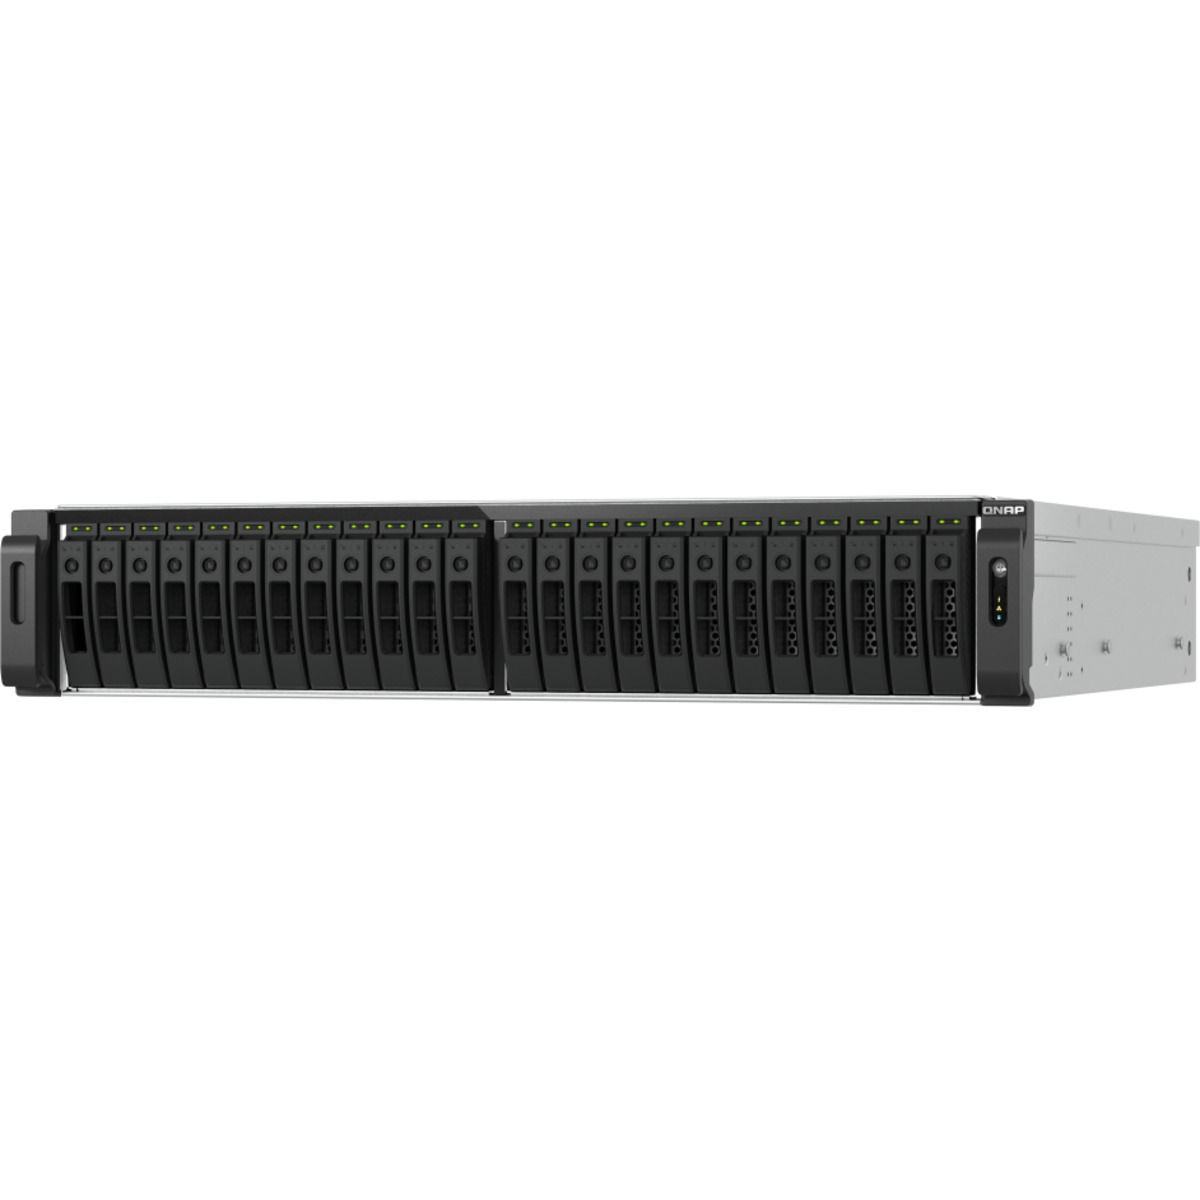 QNAP TS-h3077AFU Ryzen 7 All-Flash ZFS 29tb 30-Bay RackMount Large Business / Enterprise NAS - Network Attached Storage Device 29x1tb Western Digital Red SA500 WDS100T1R0A 2.5 560/530MB/s SATA 6Gb/s SSD NAS Class Drives Installed - Burn-In Tested TS-h3077AFU Ryzen 7 All-Flash ZFS